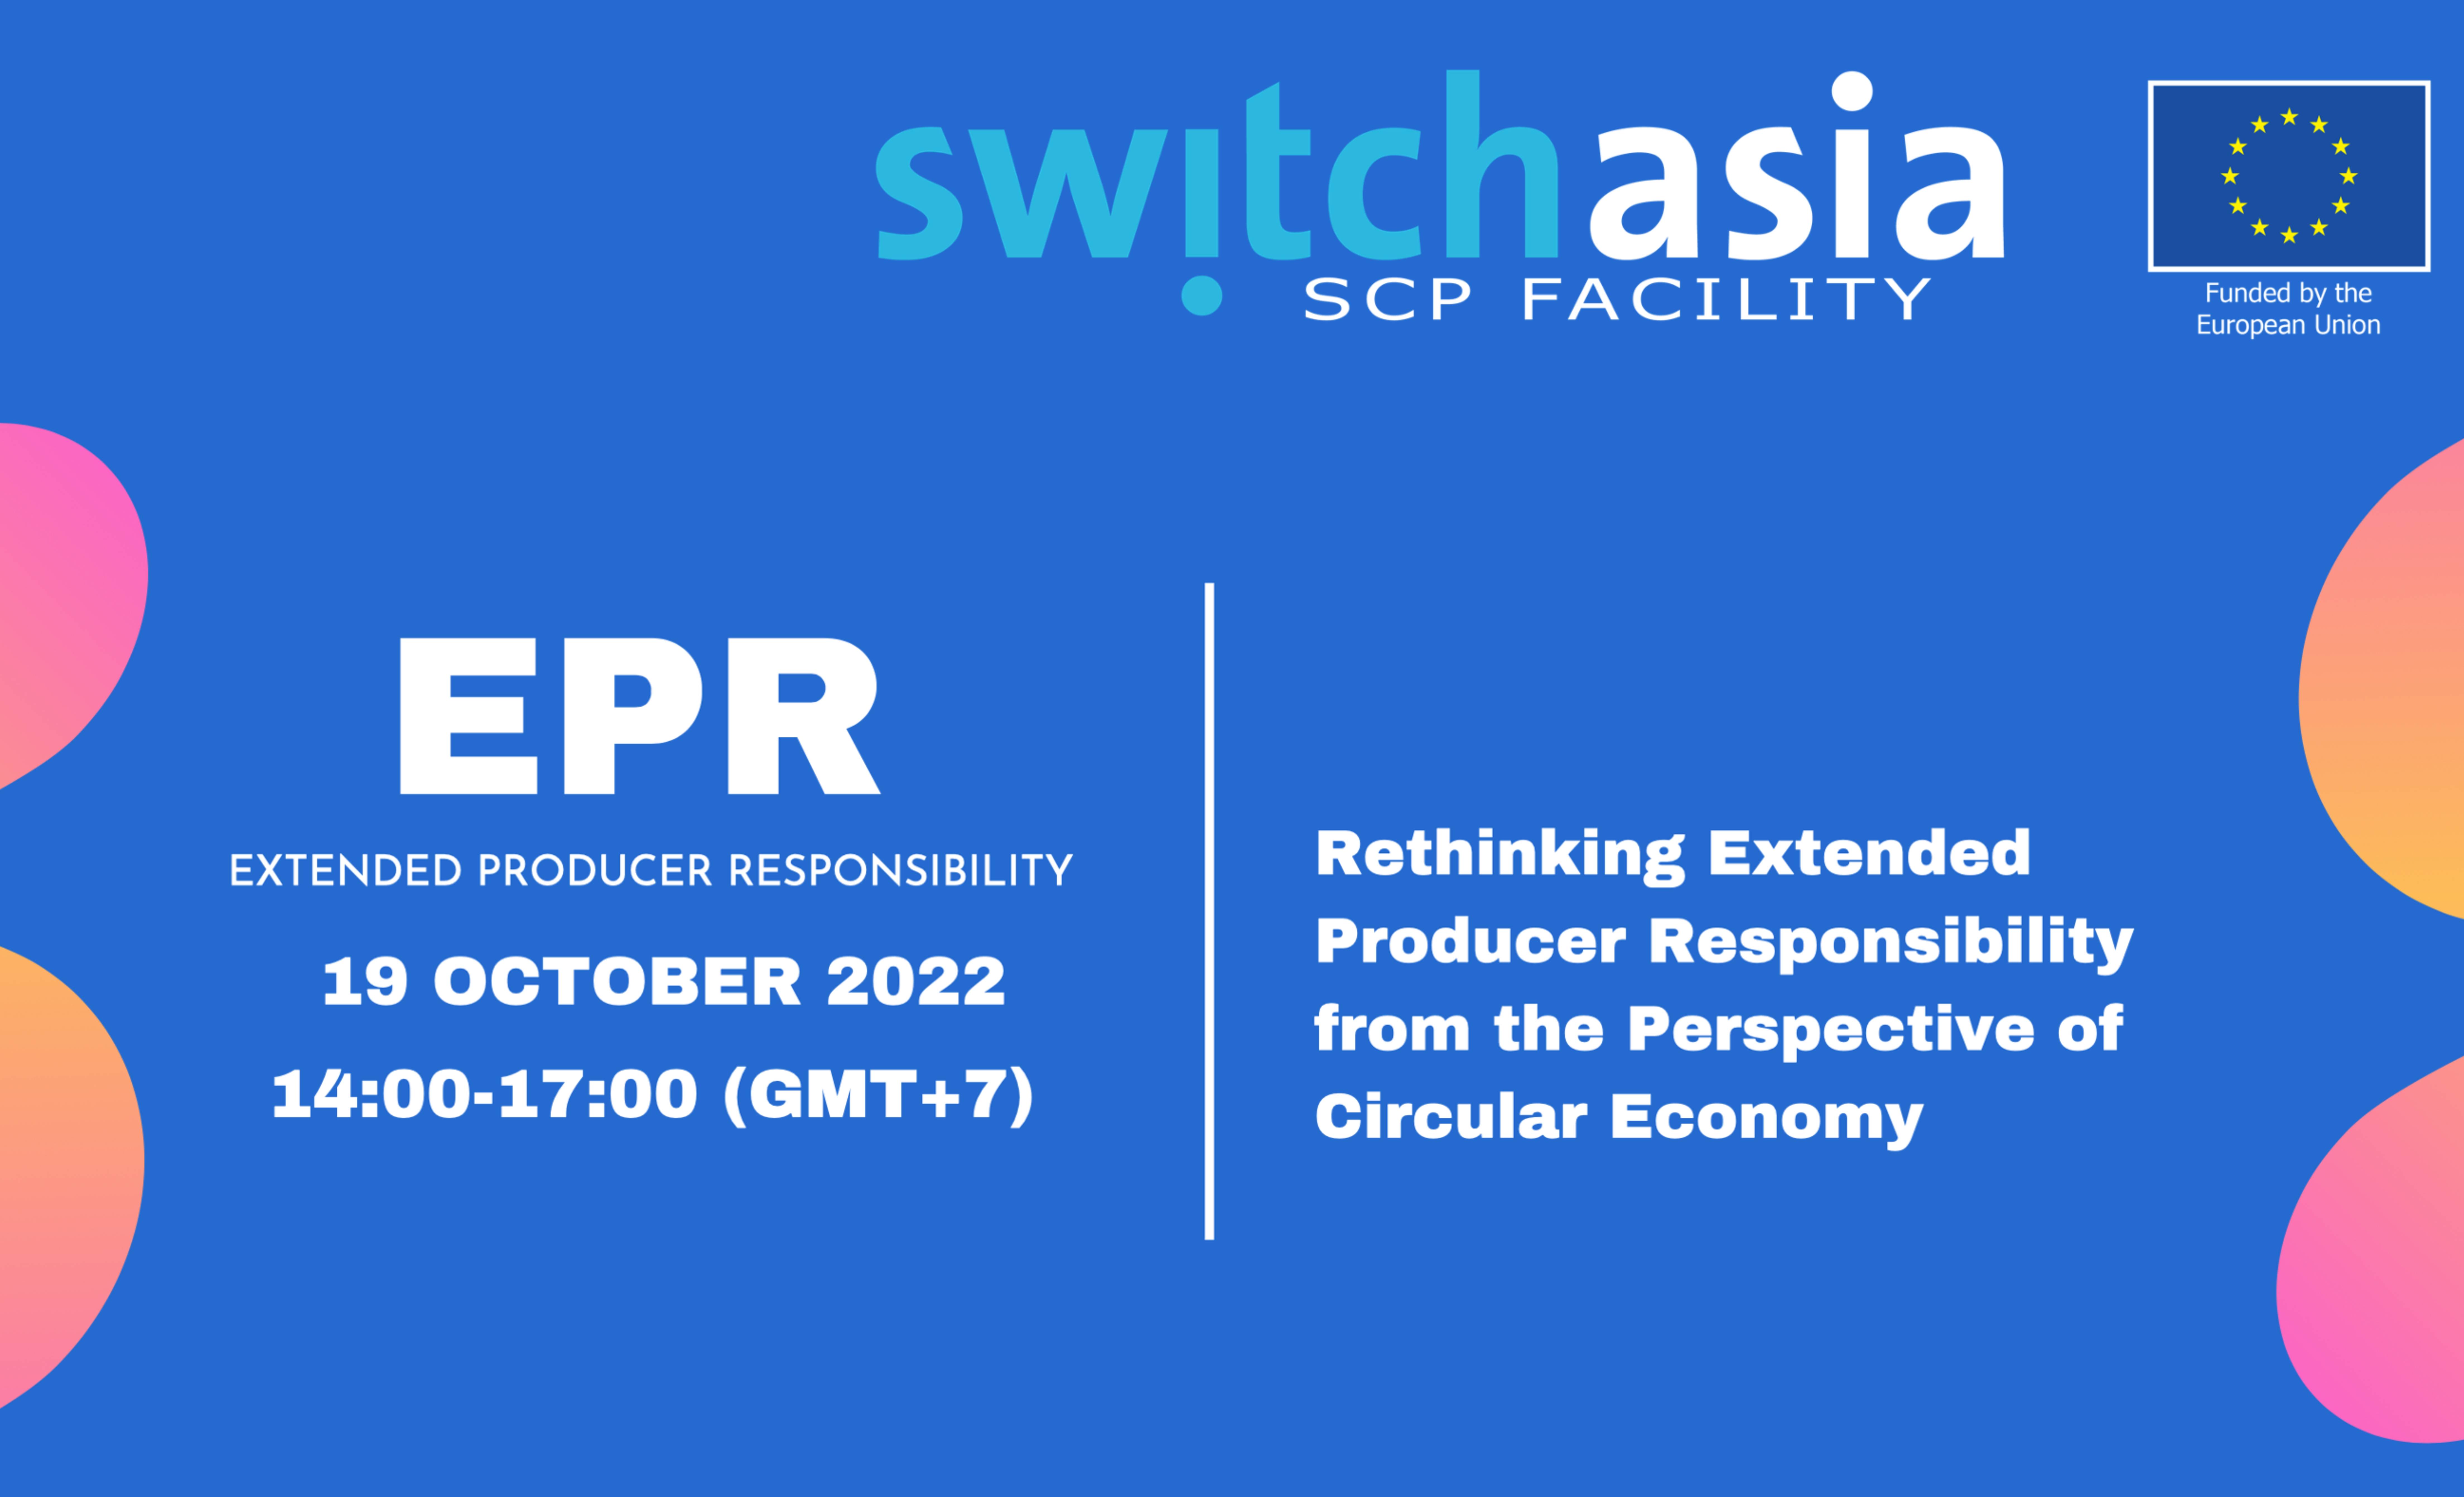 Rethinking Extended Producer Responsibility from the Perspective of Circular Economy.